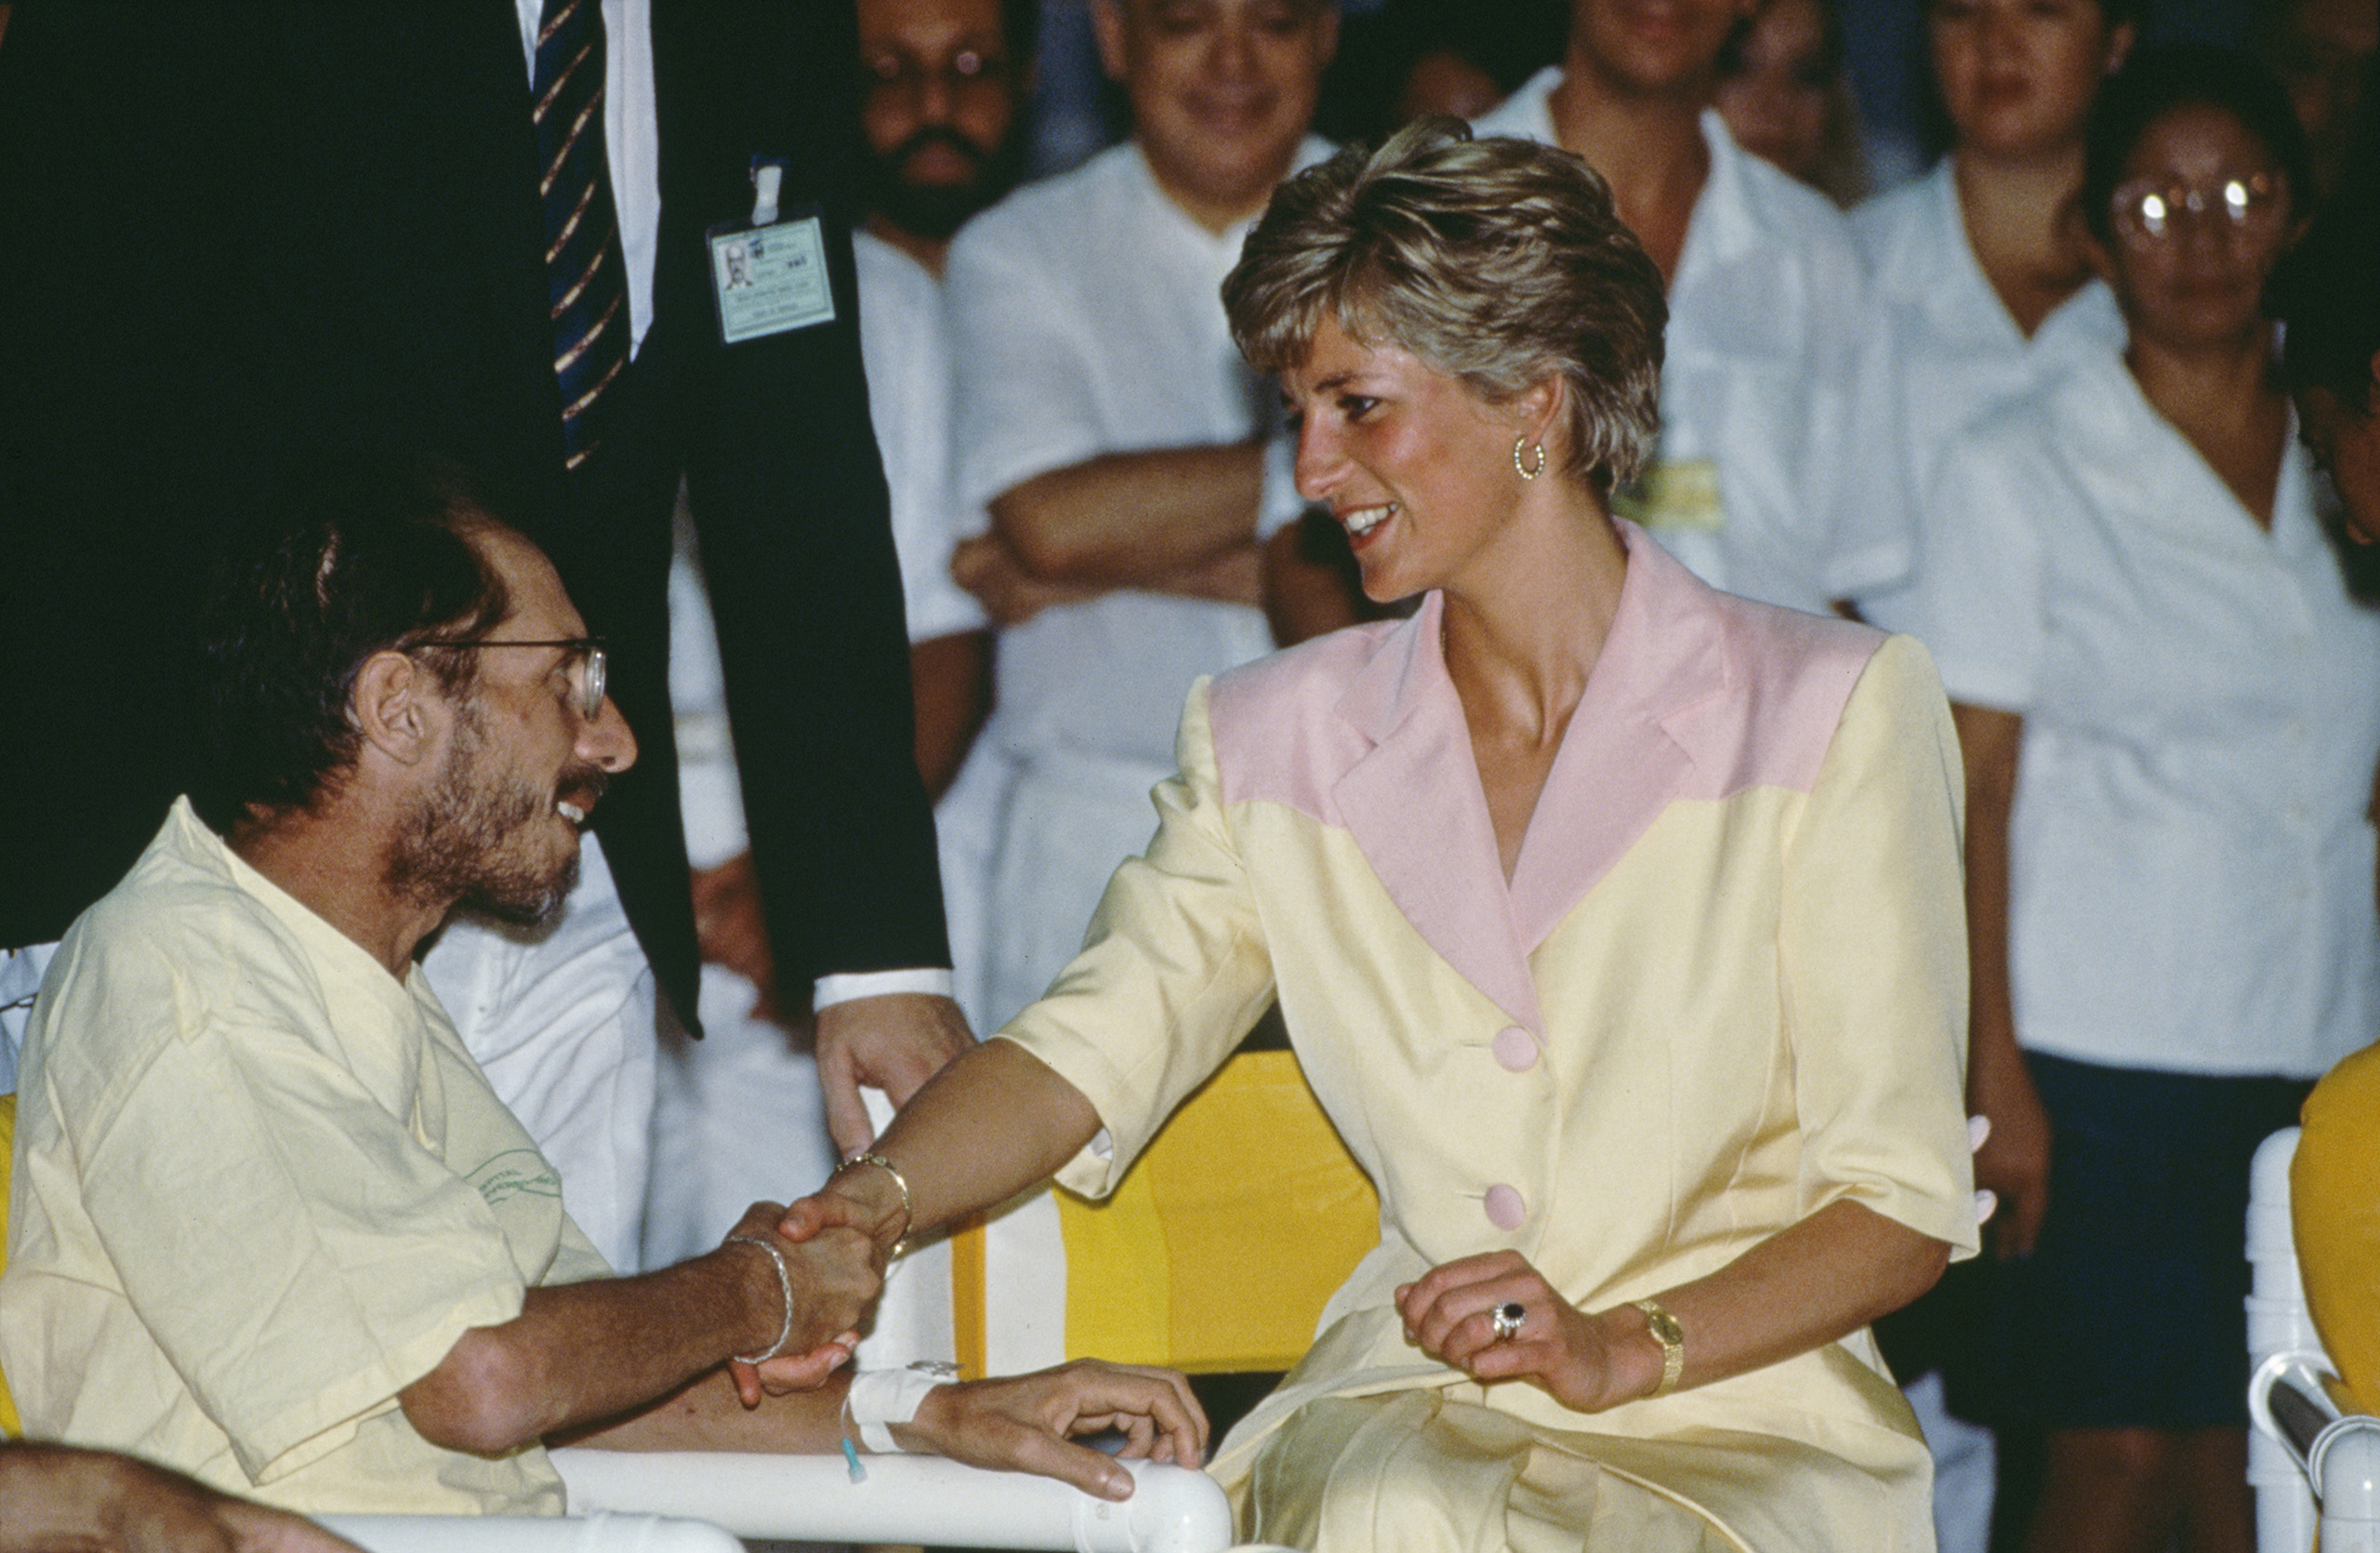 Diana, Princess of Wales visiting patients suffering from AIDS at the Hospital Universidade in Rio de Janeiro, Brazil, in April 1991. (Tim Graham—Getty Images)